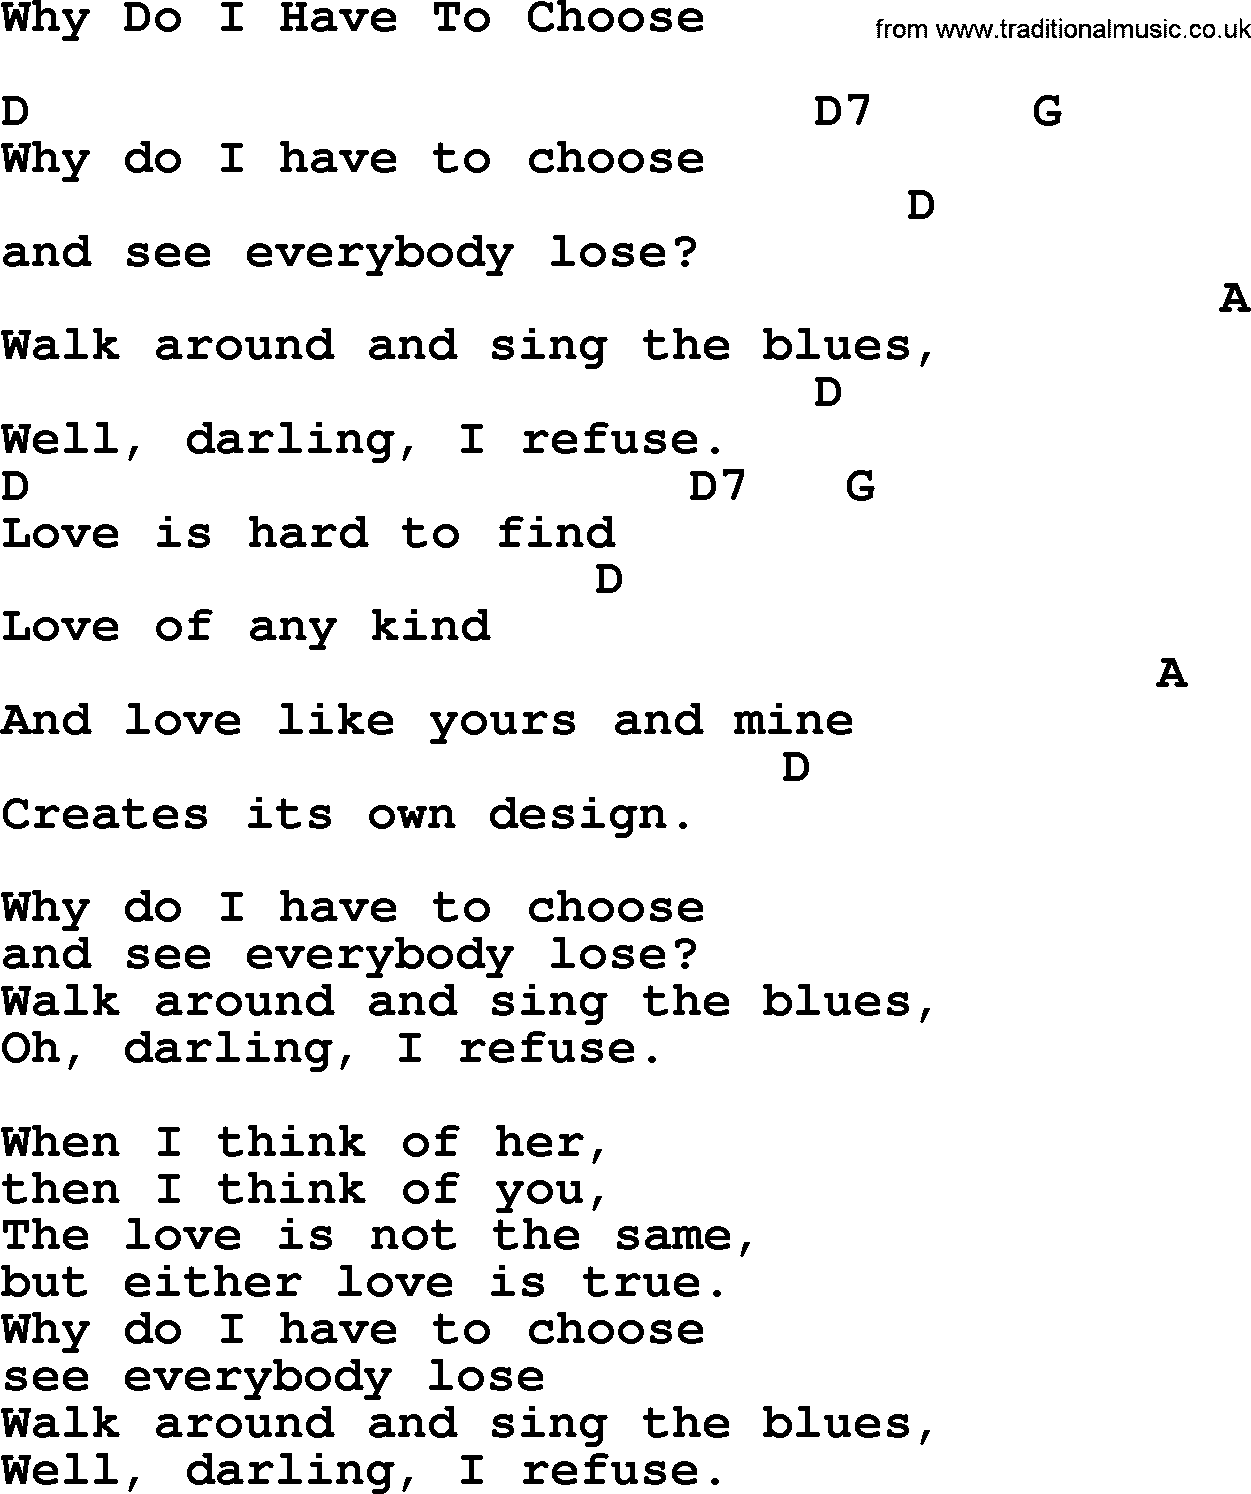 Willie Nelson song: Why Do I Have To Choose, lyrics and chords